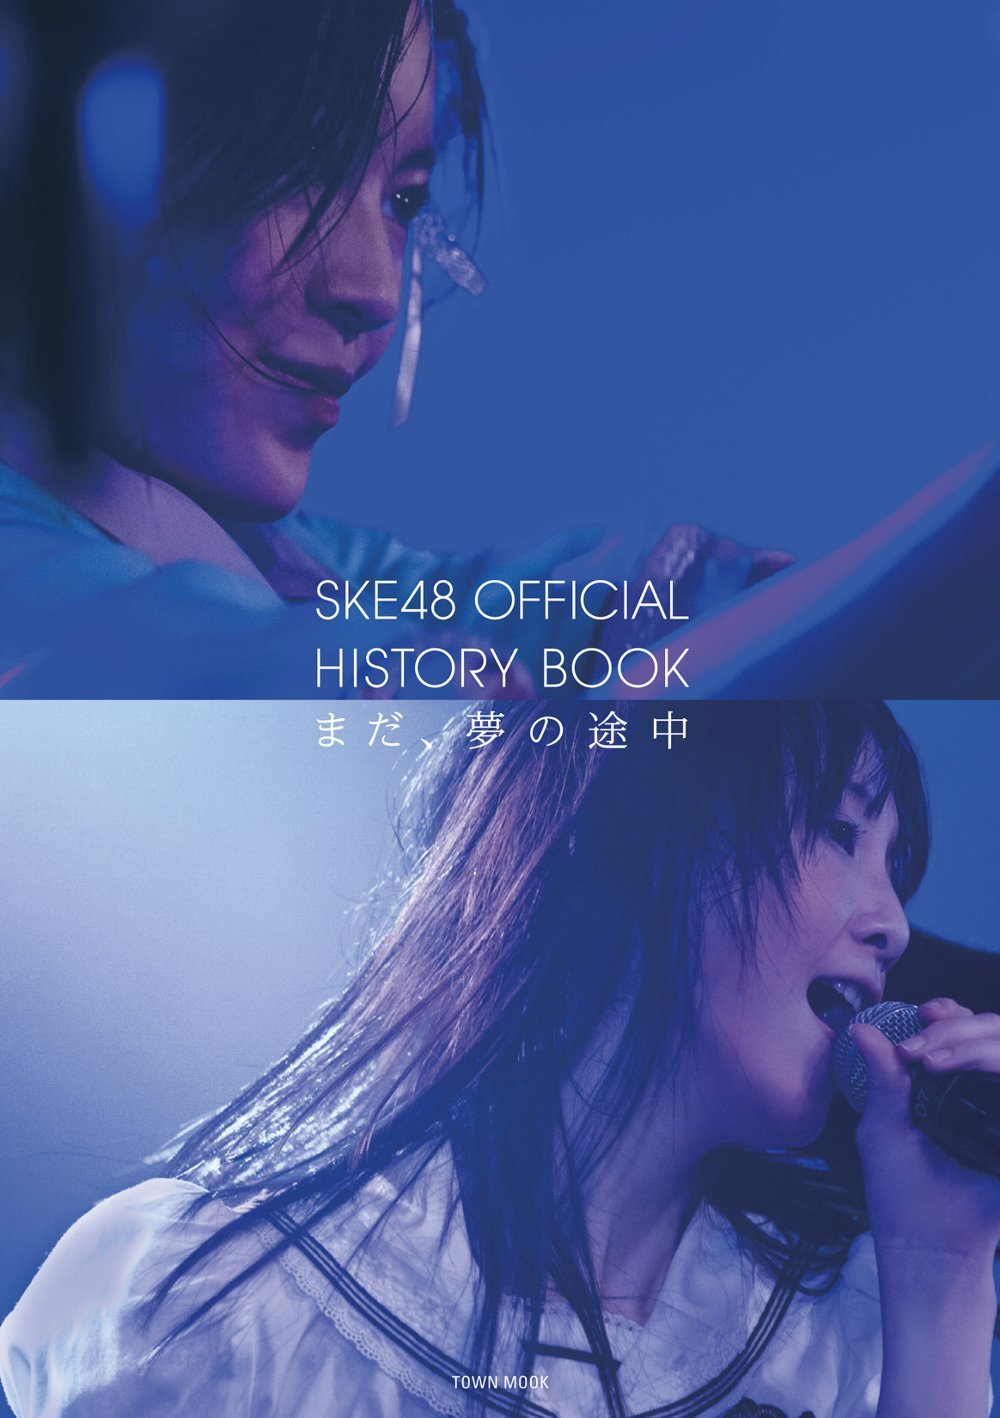 SKE48 Official History Book “Mada, Yume no Tochuu” will be released